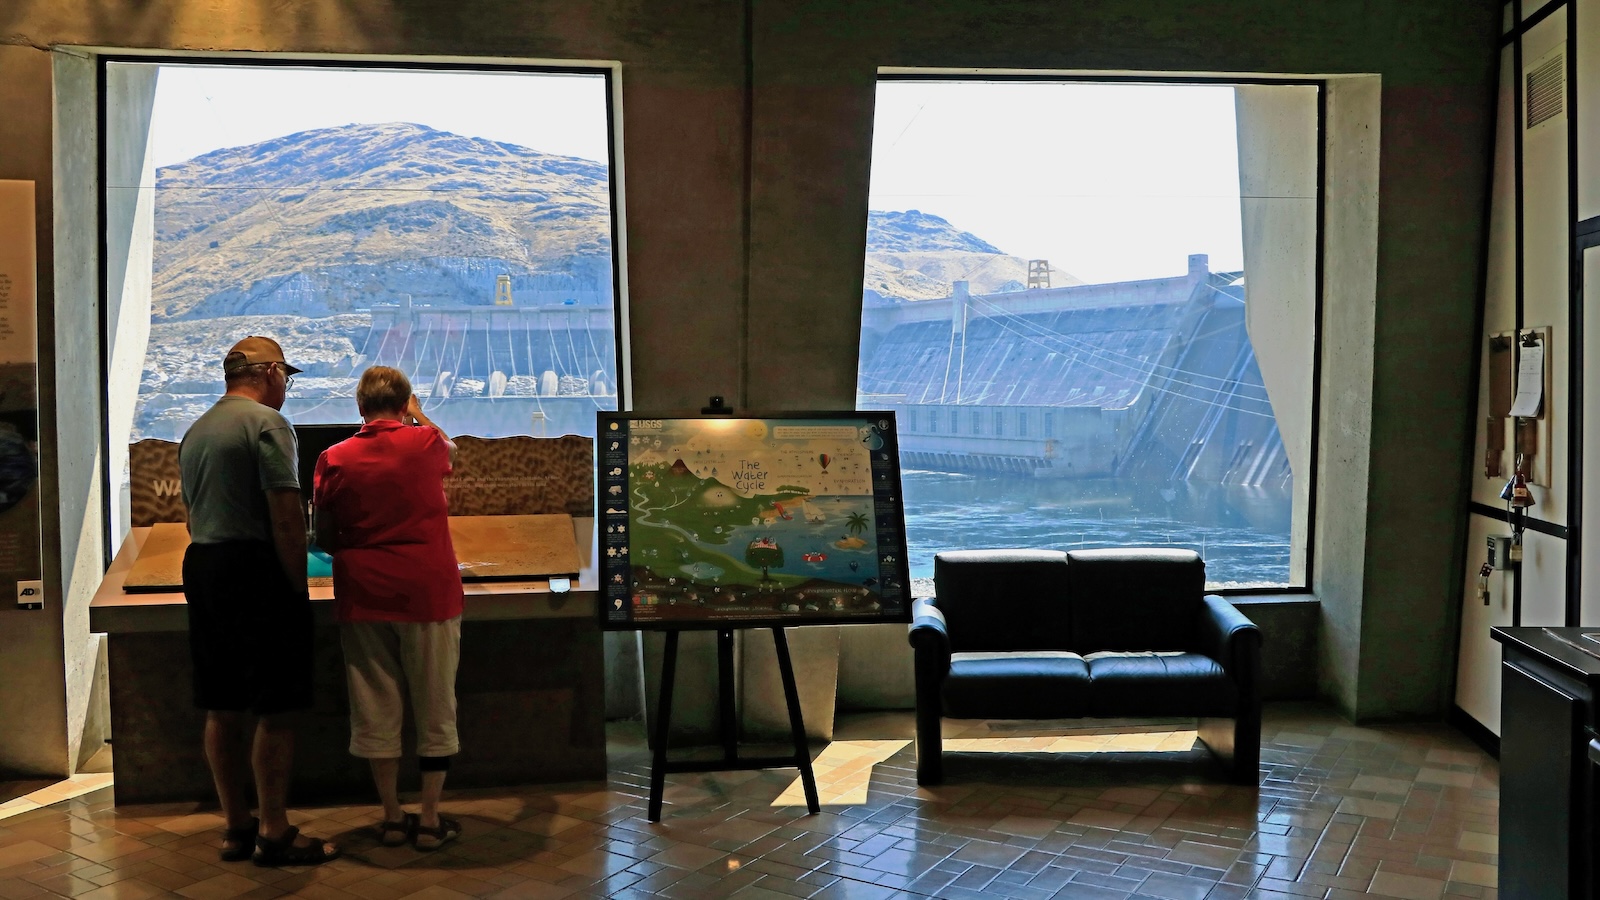 The Grand Coulee Dam is seen through the windows of the dam's visitor center.